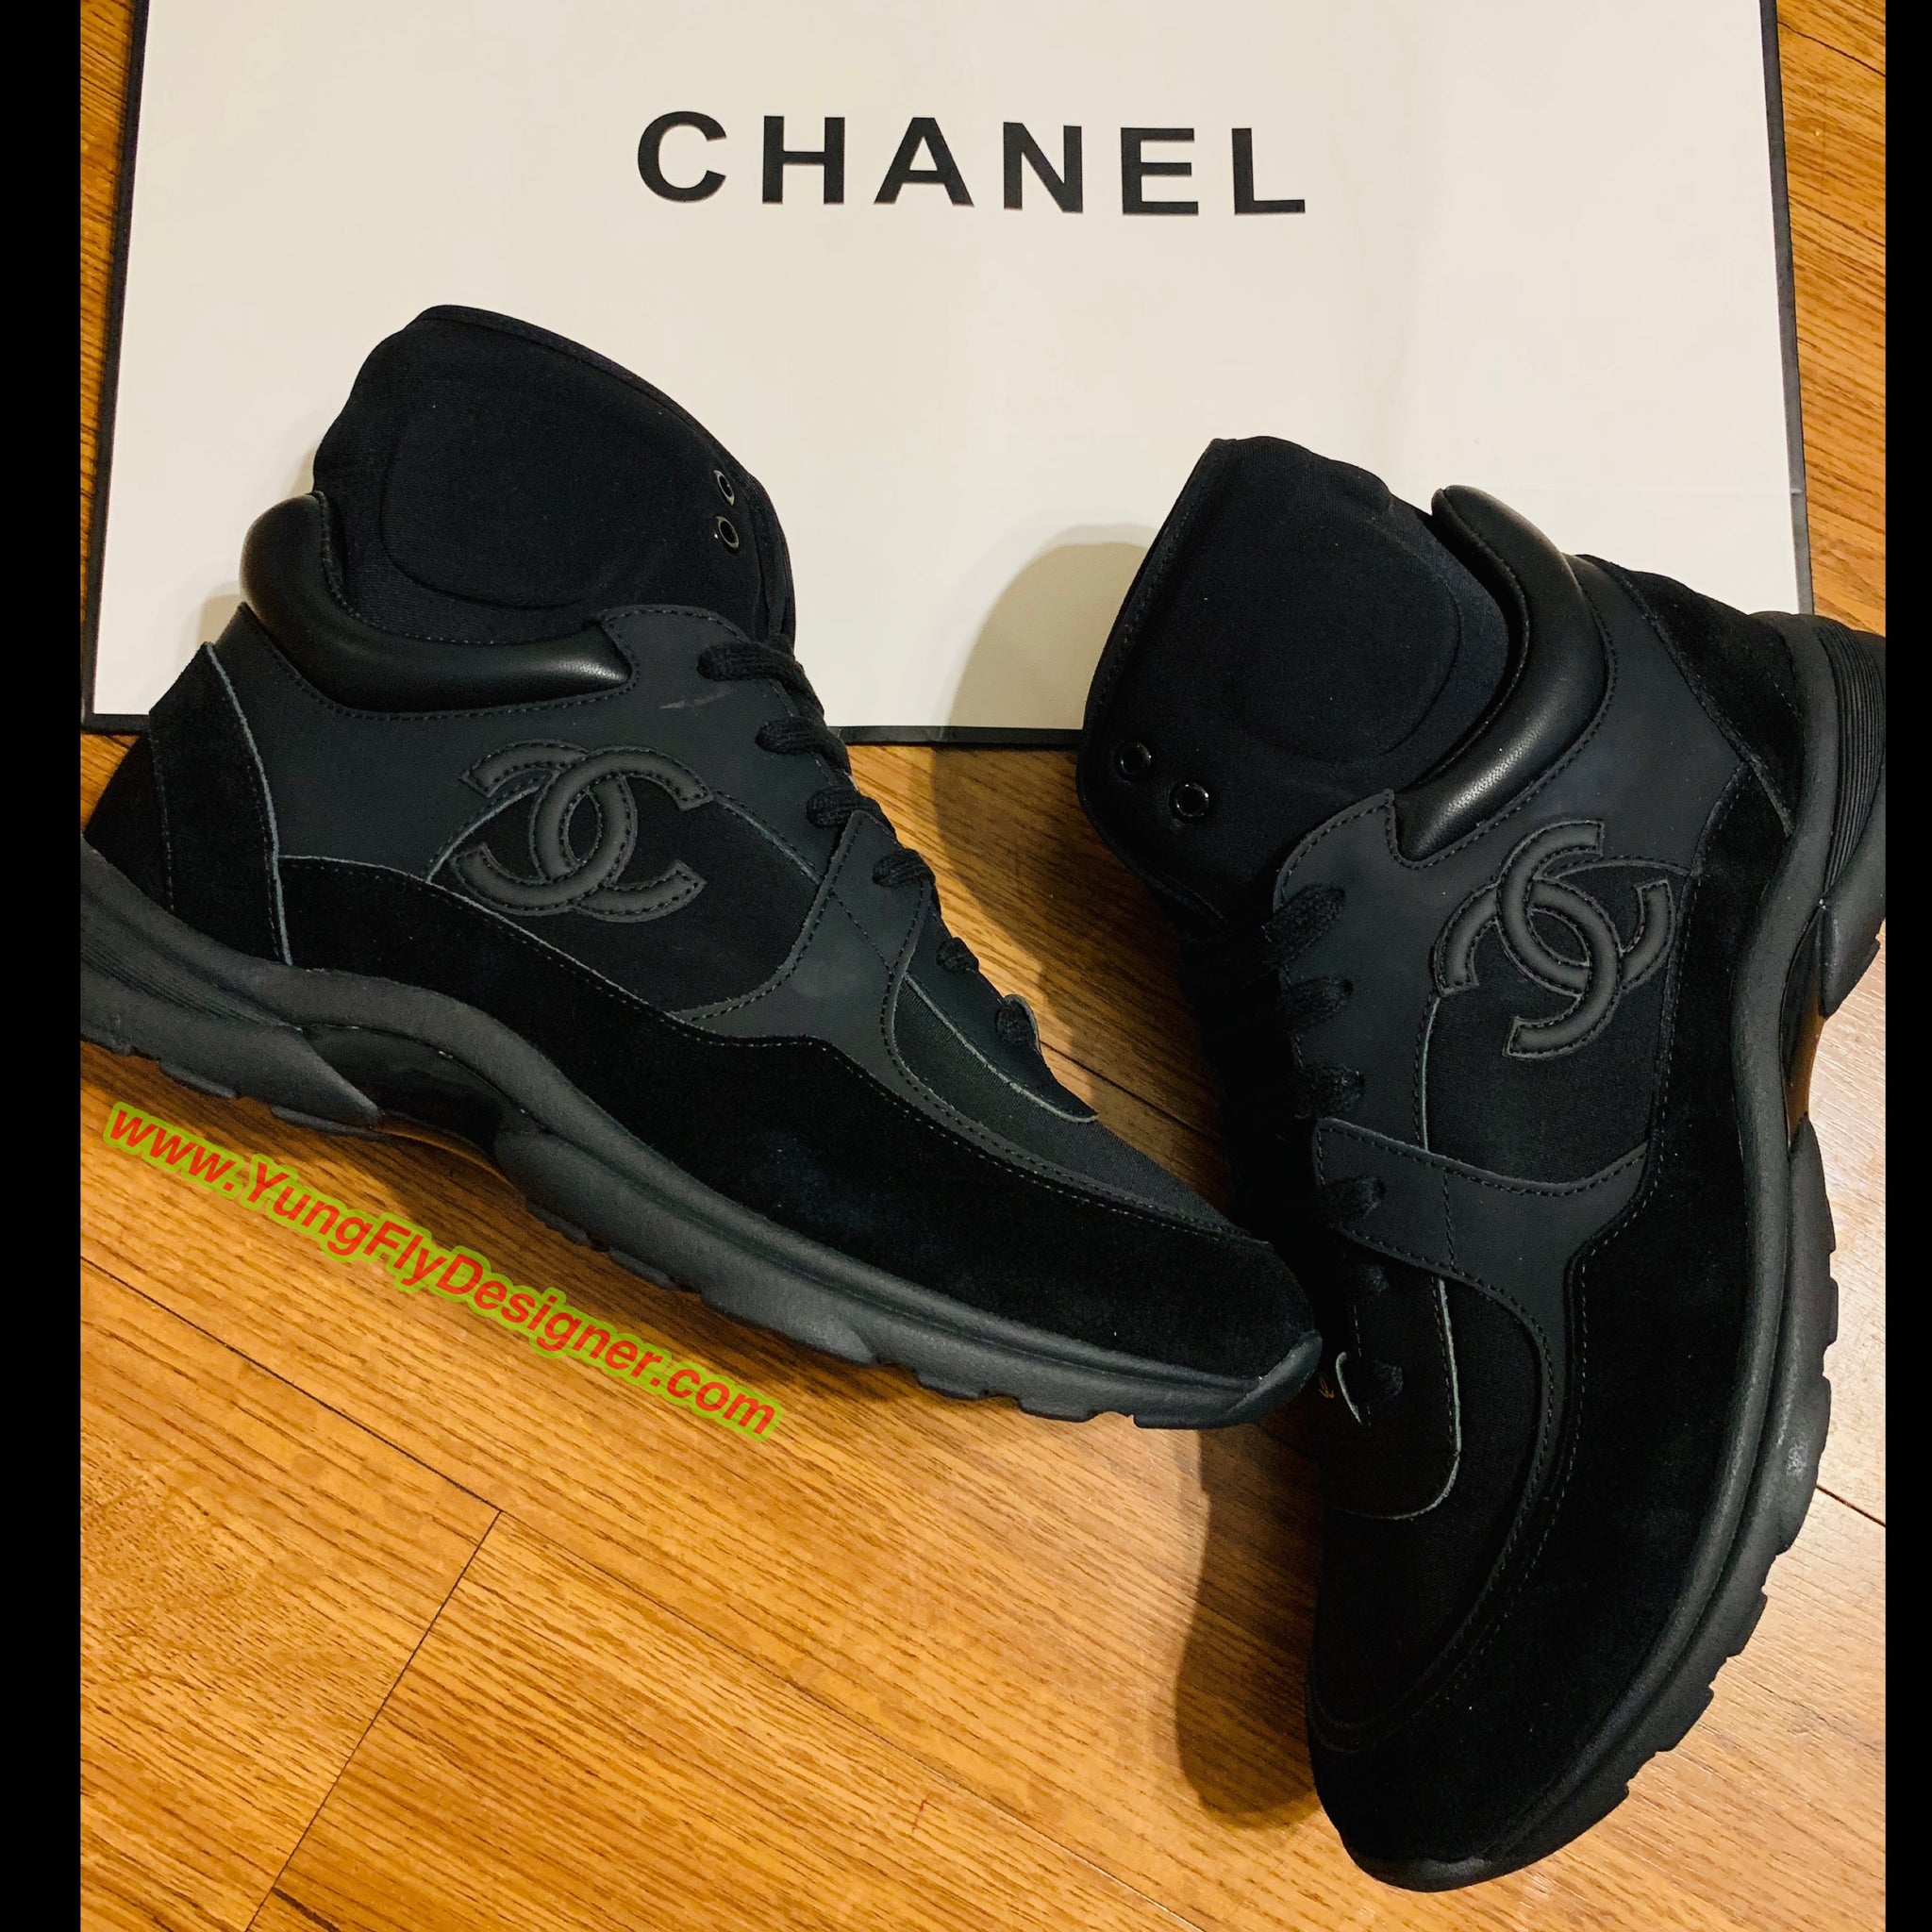 black high top chanel sneakers